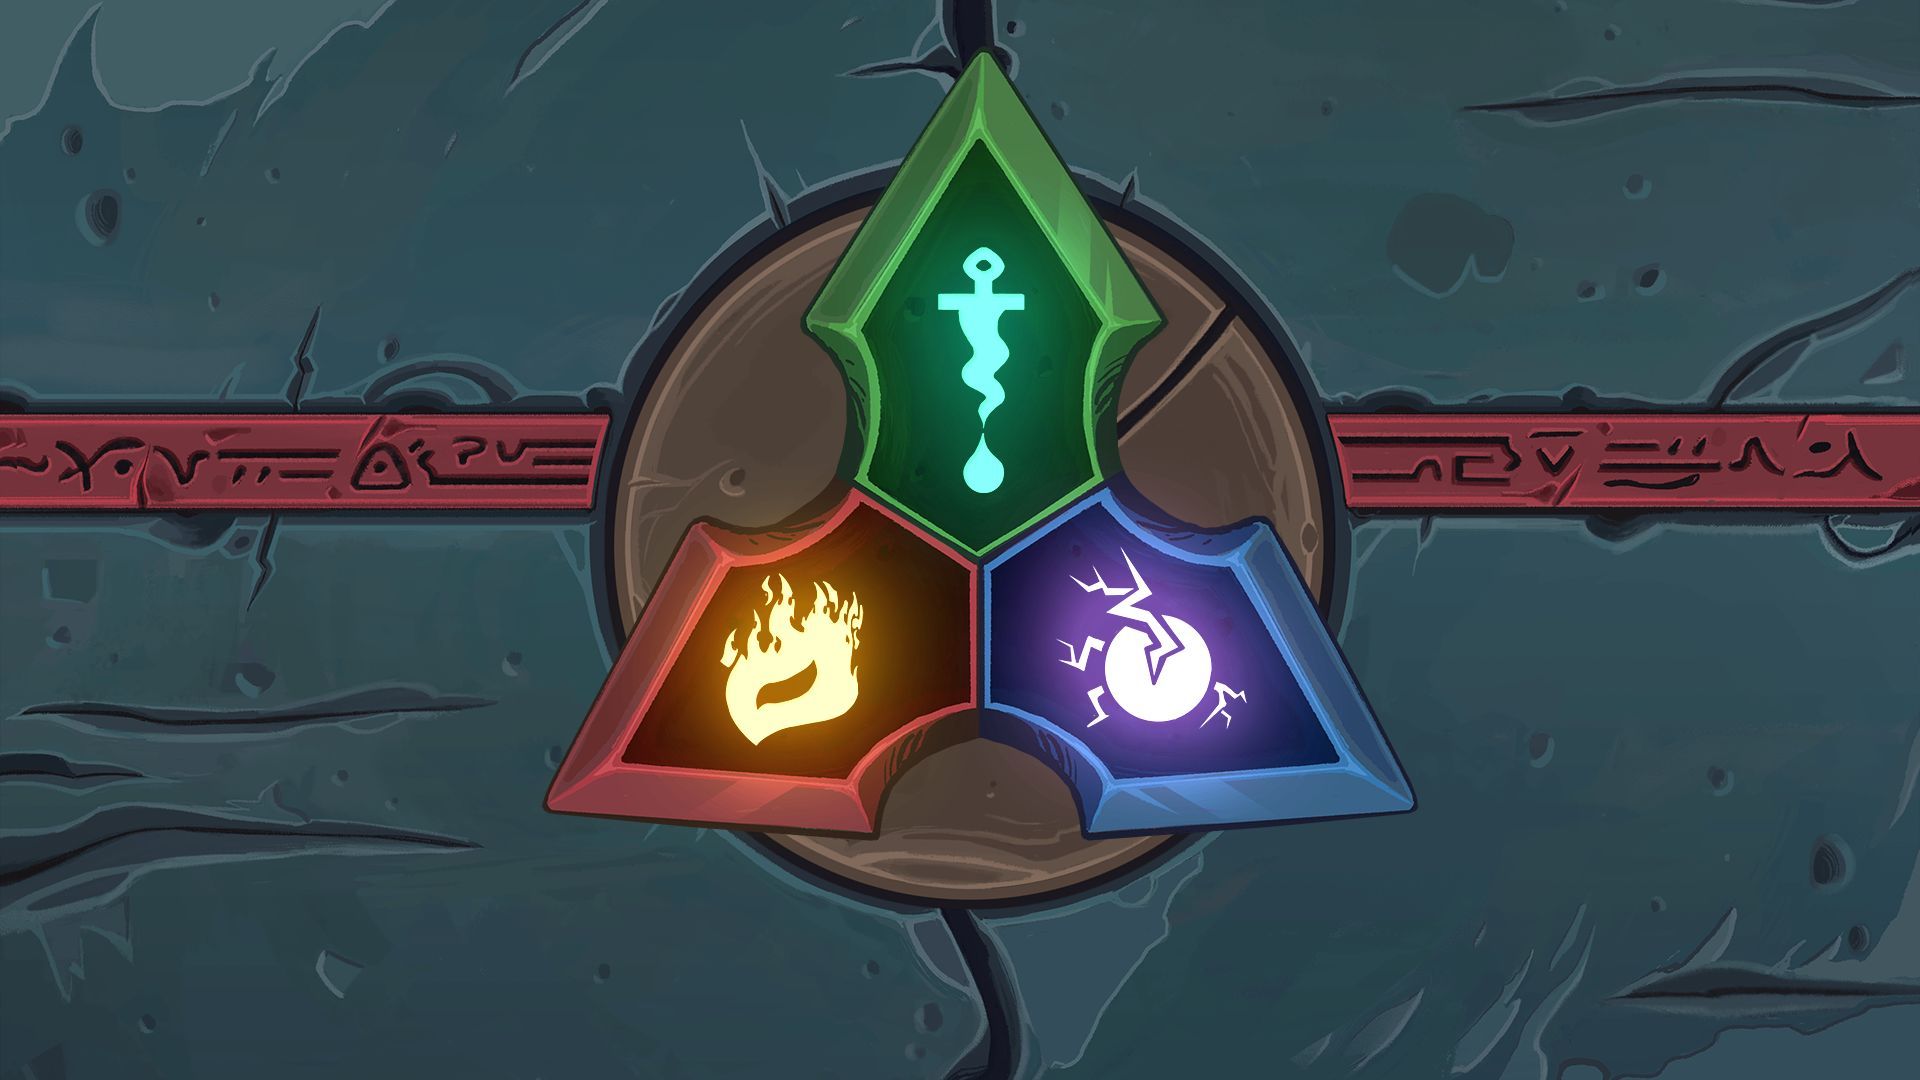 The Three Keys unlocking the fourth act in Slay The Spire